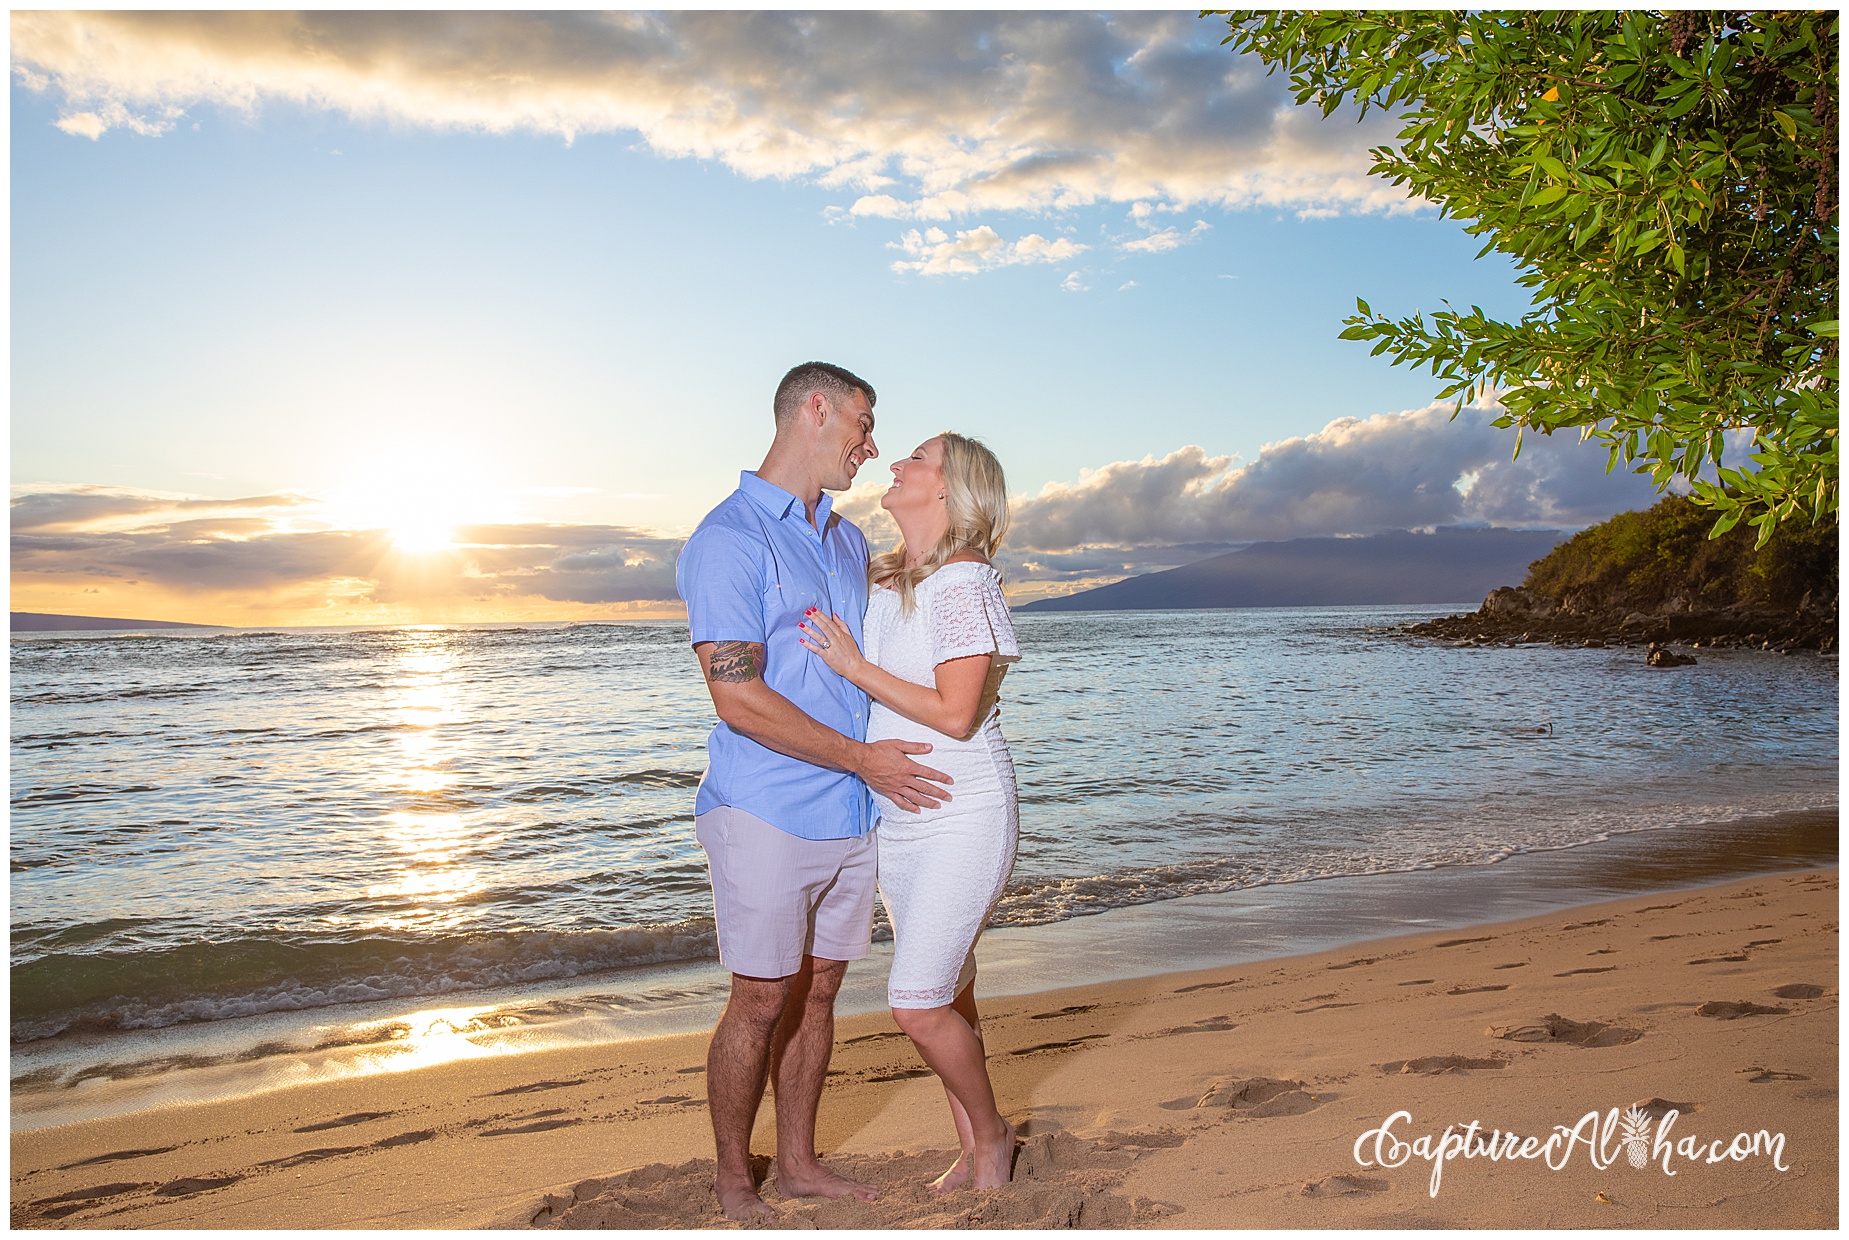 Wife and husband on a maternity photoshoot in Maui on the beach